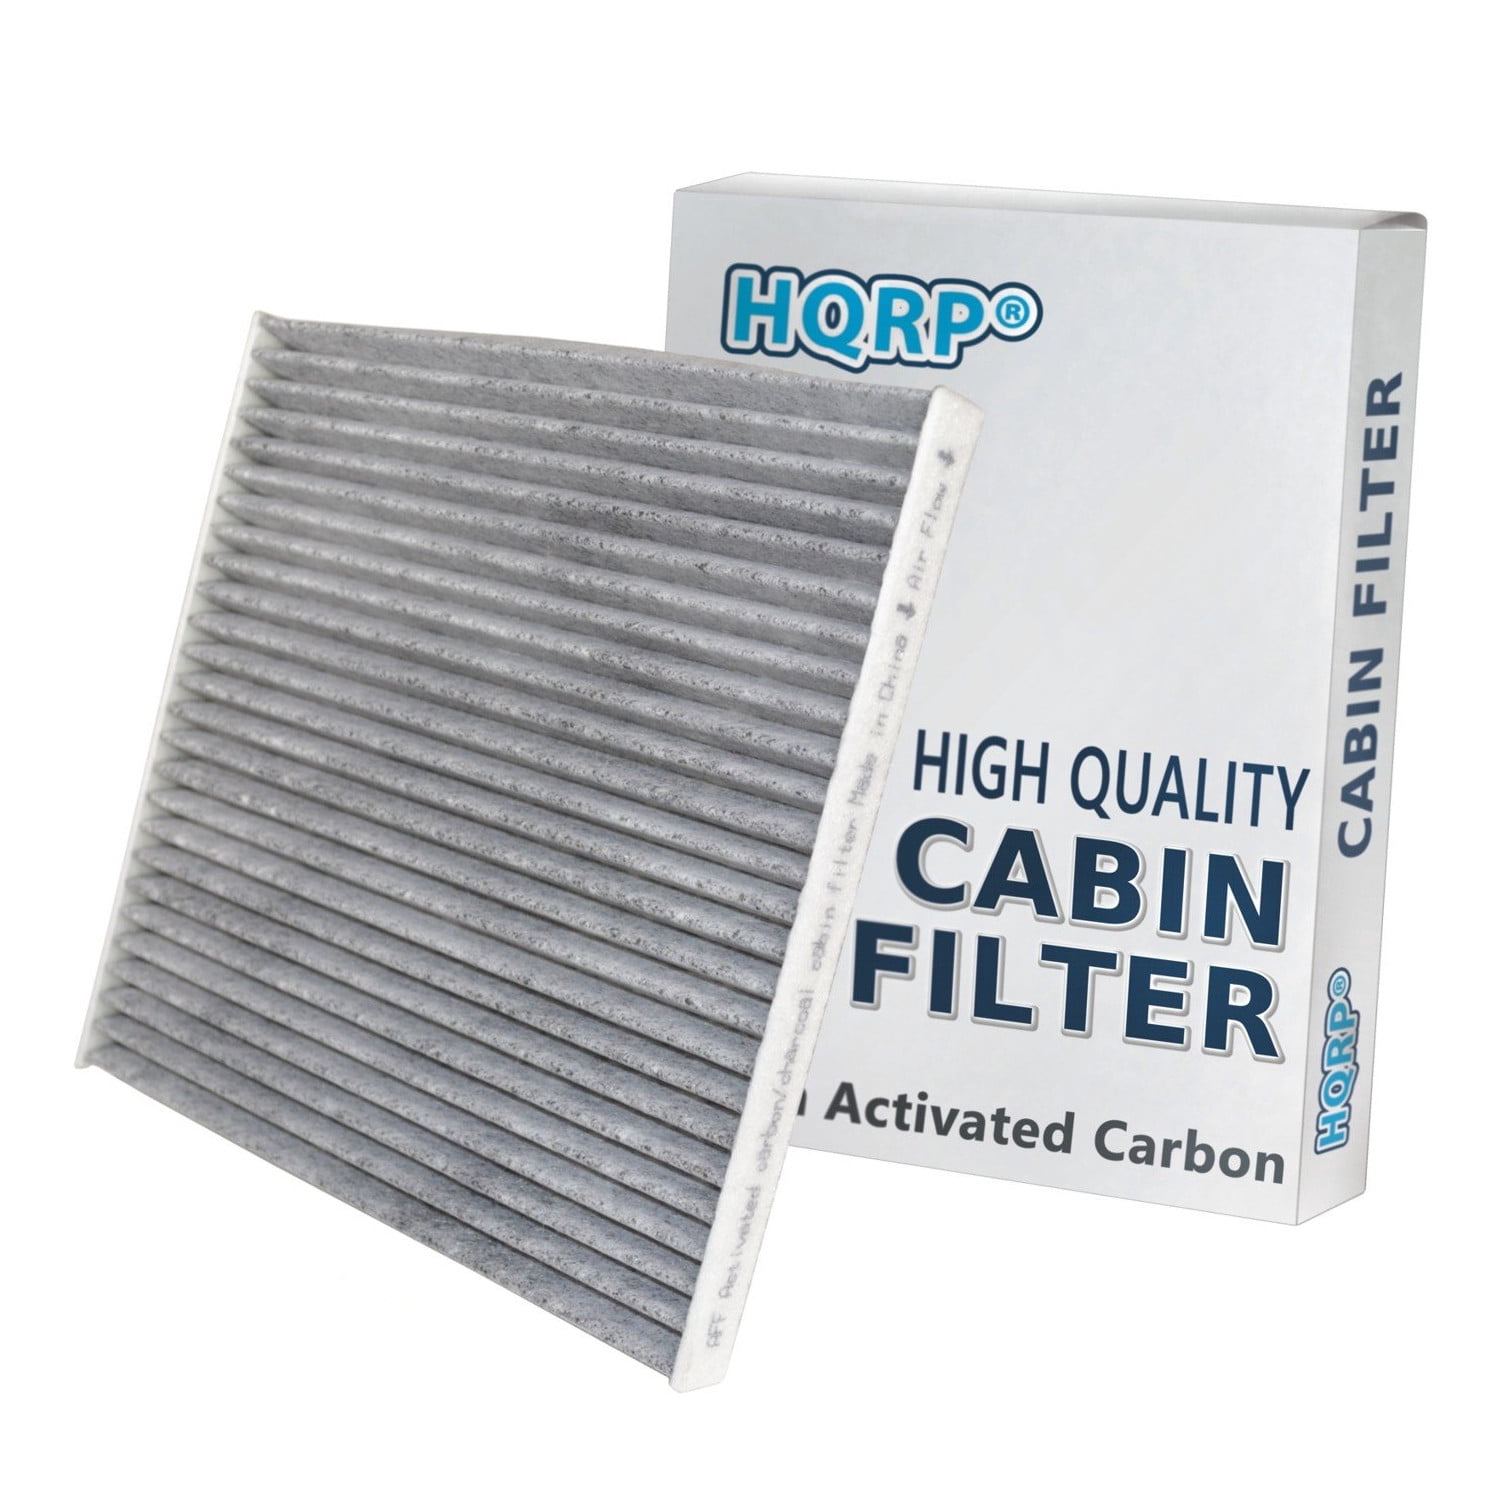 HQRP Cabin Air Filter for Toyota Lexus 87139-48020-83 / 871394802083 /  87139-50010 / 8713950010 / 87139-YZZ02 / 87139YZZ02 Activated Charcoal 